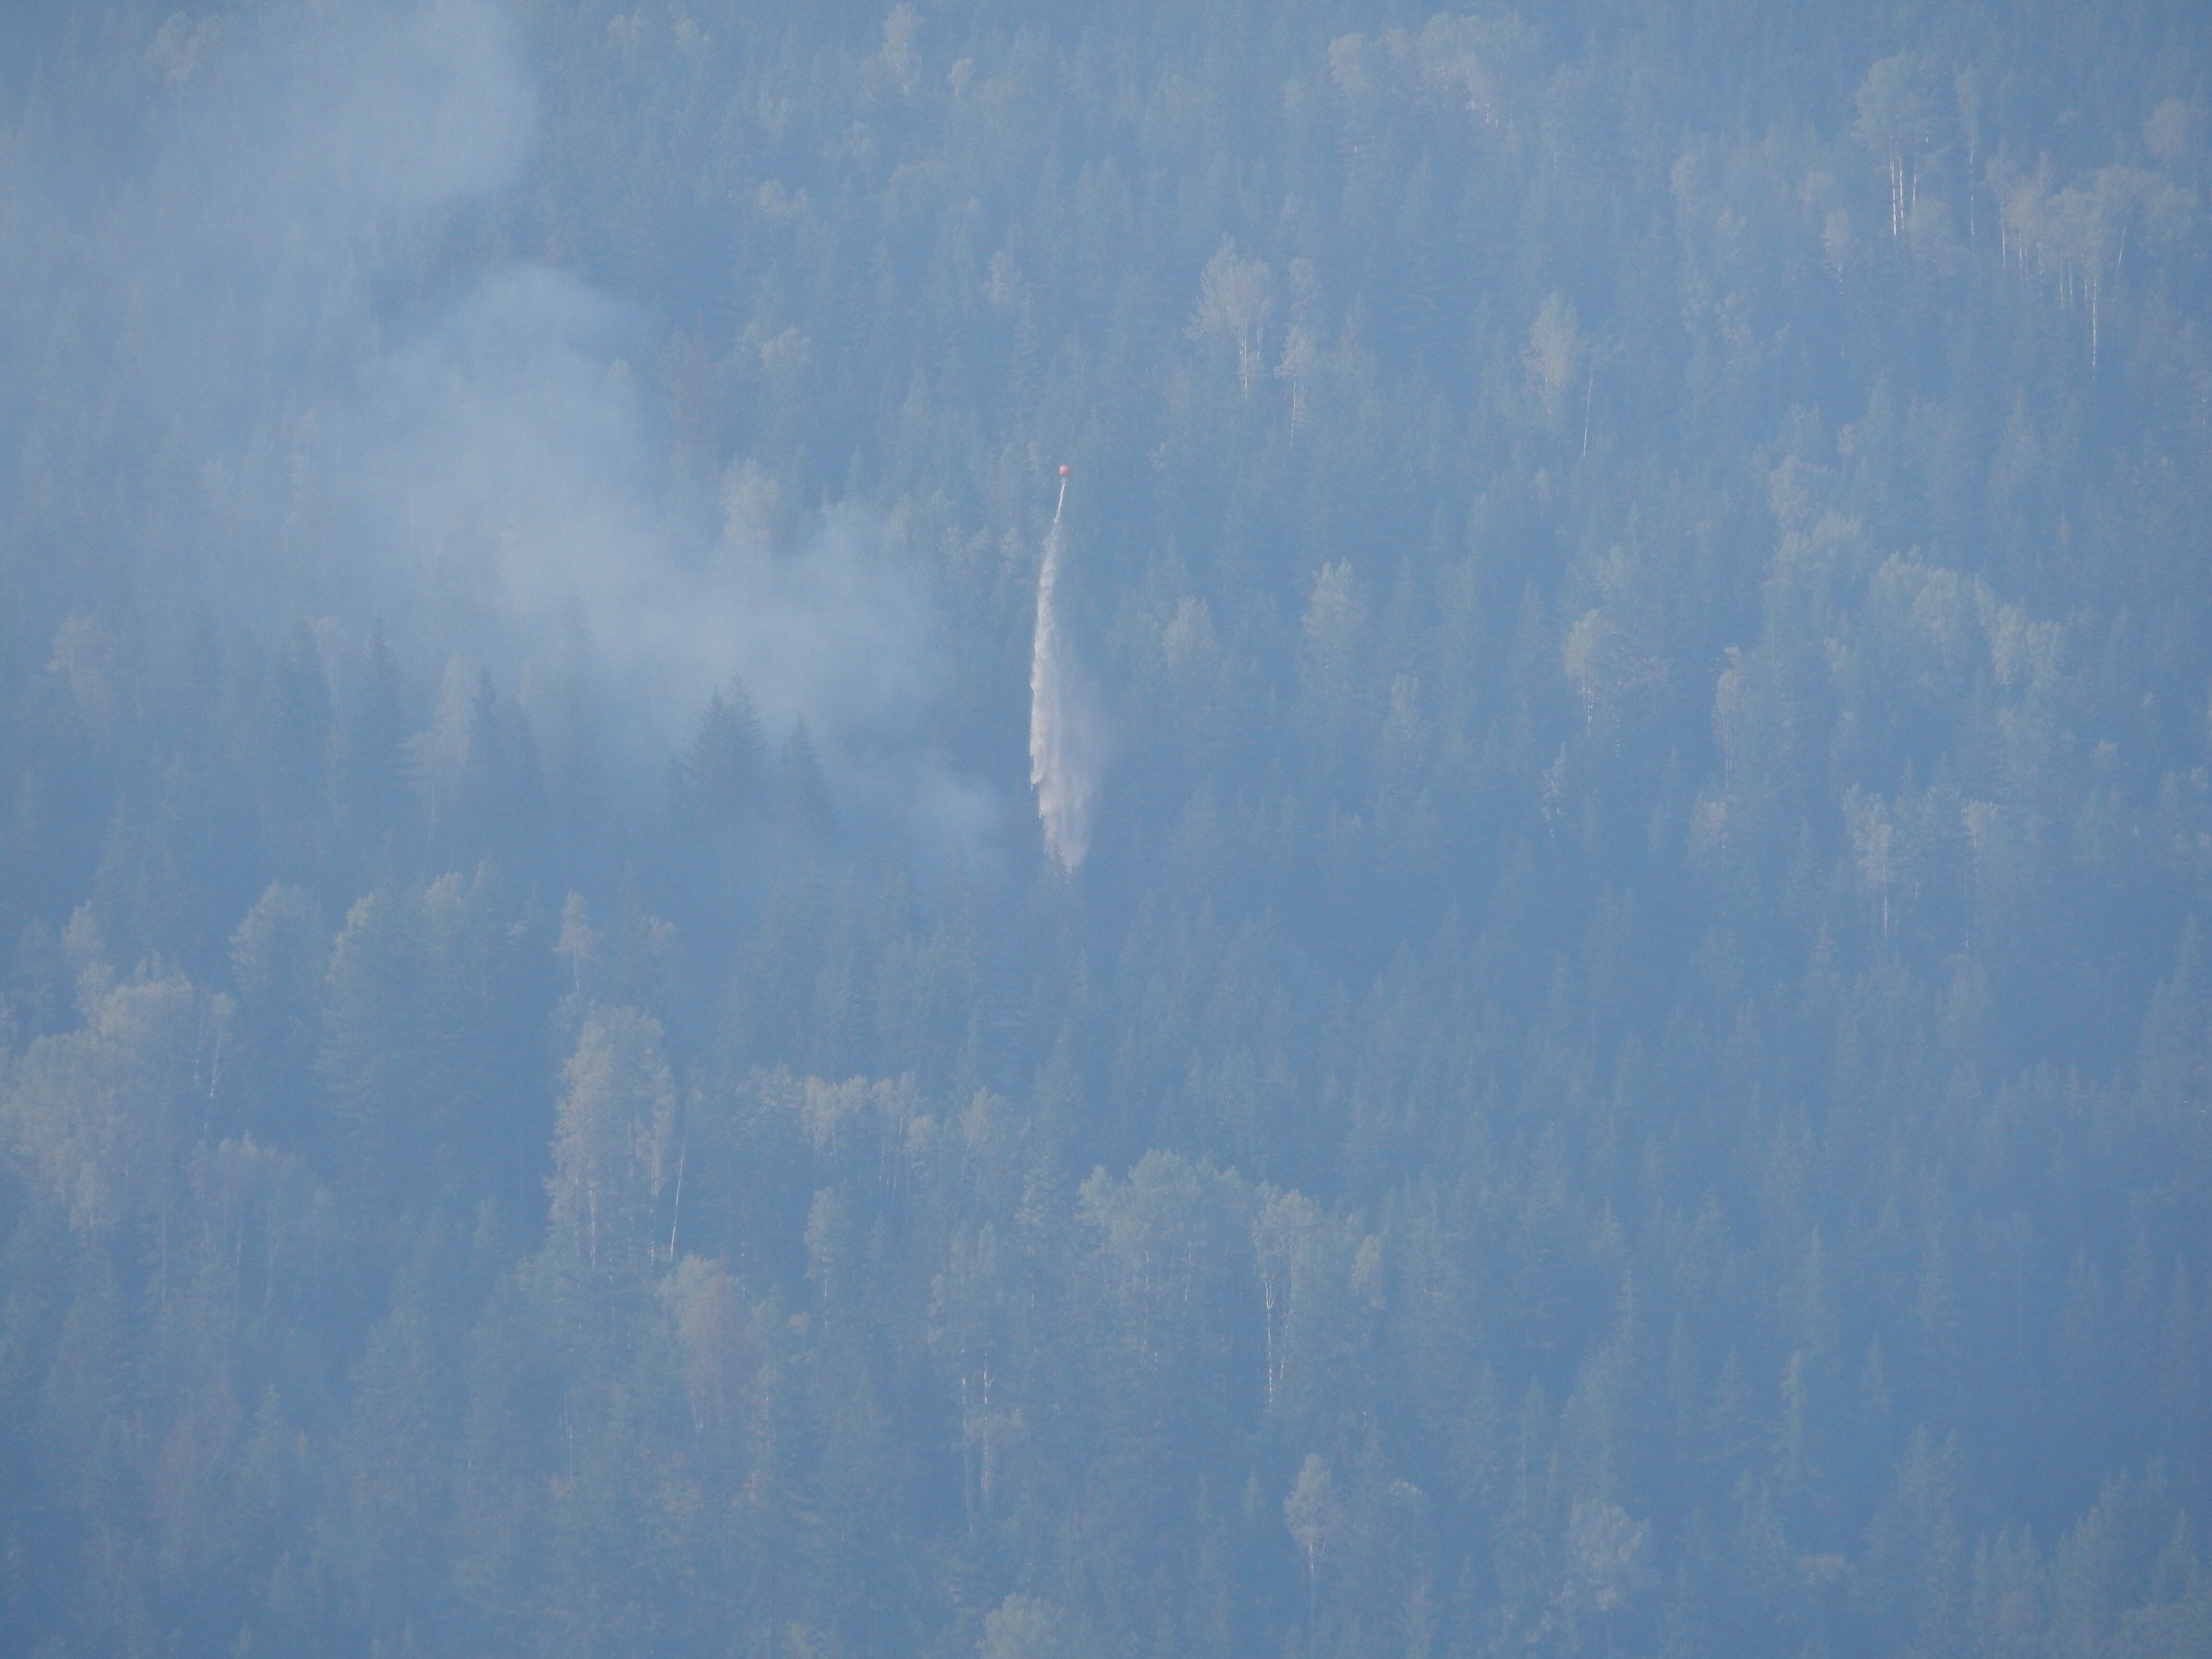 A helicopter drops a load of water on the power line fire north of Balfour, as seen from the Kootenay Lake ferry.